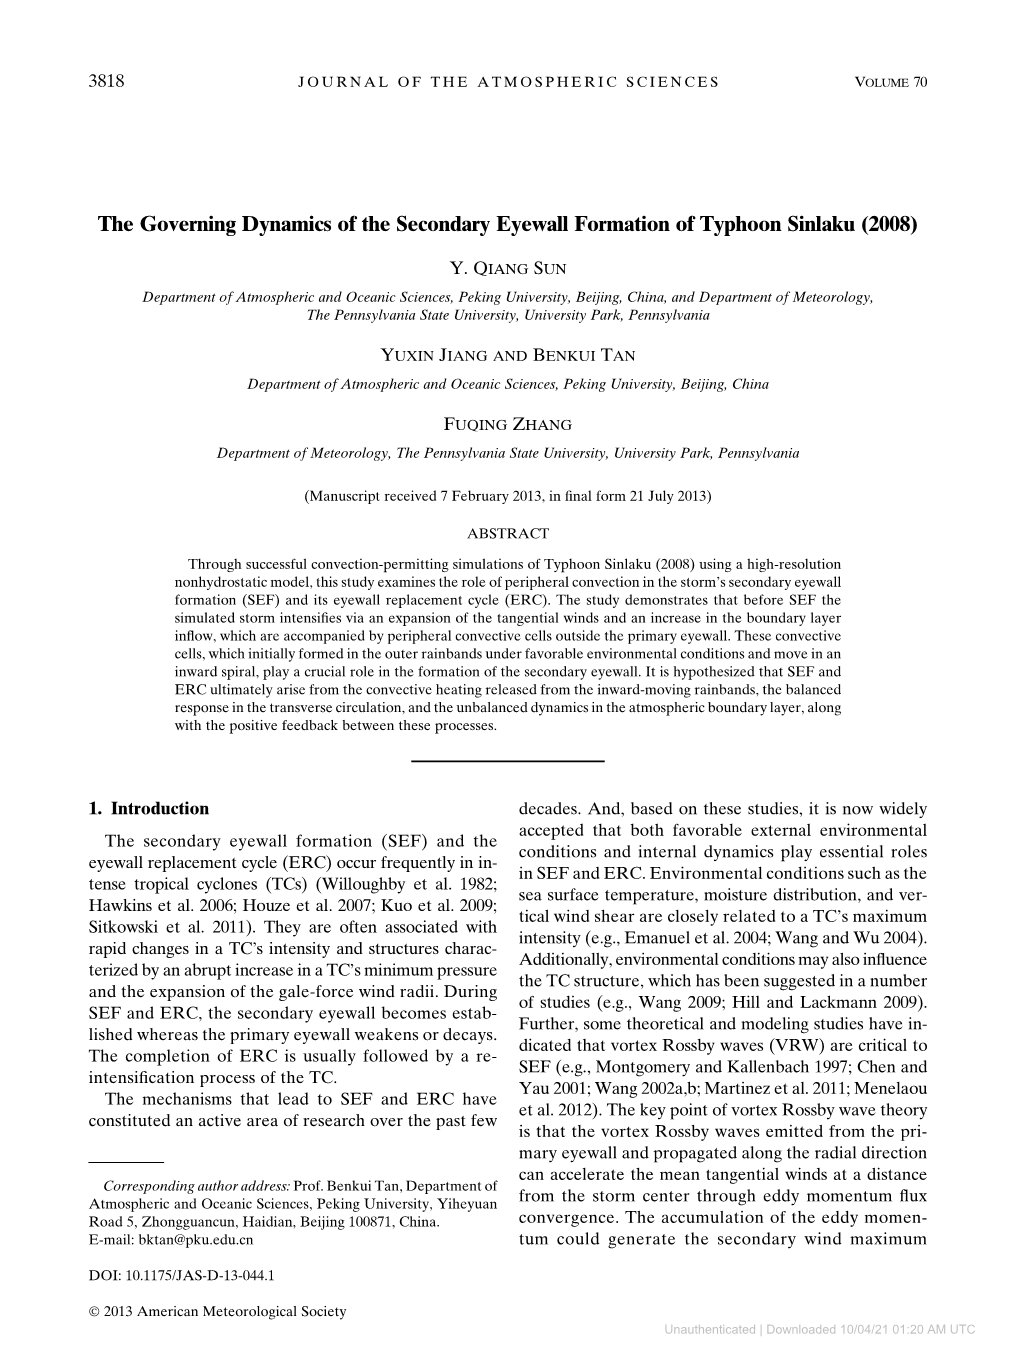 The Governing Dynamics of the Secondary Eyewall Formation of Typhoon Sinlaku (2008)